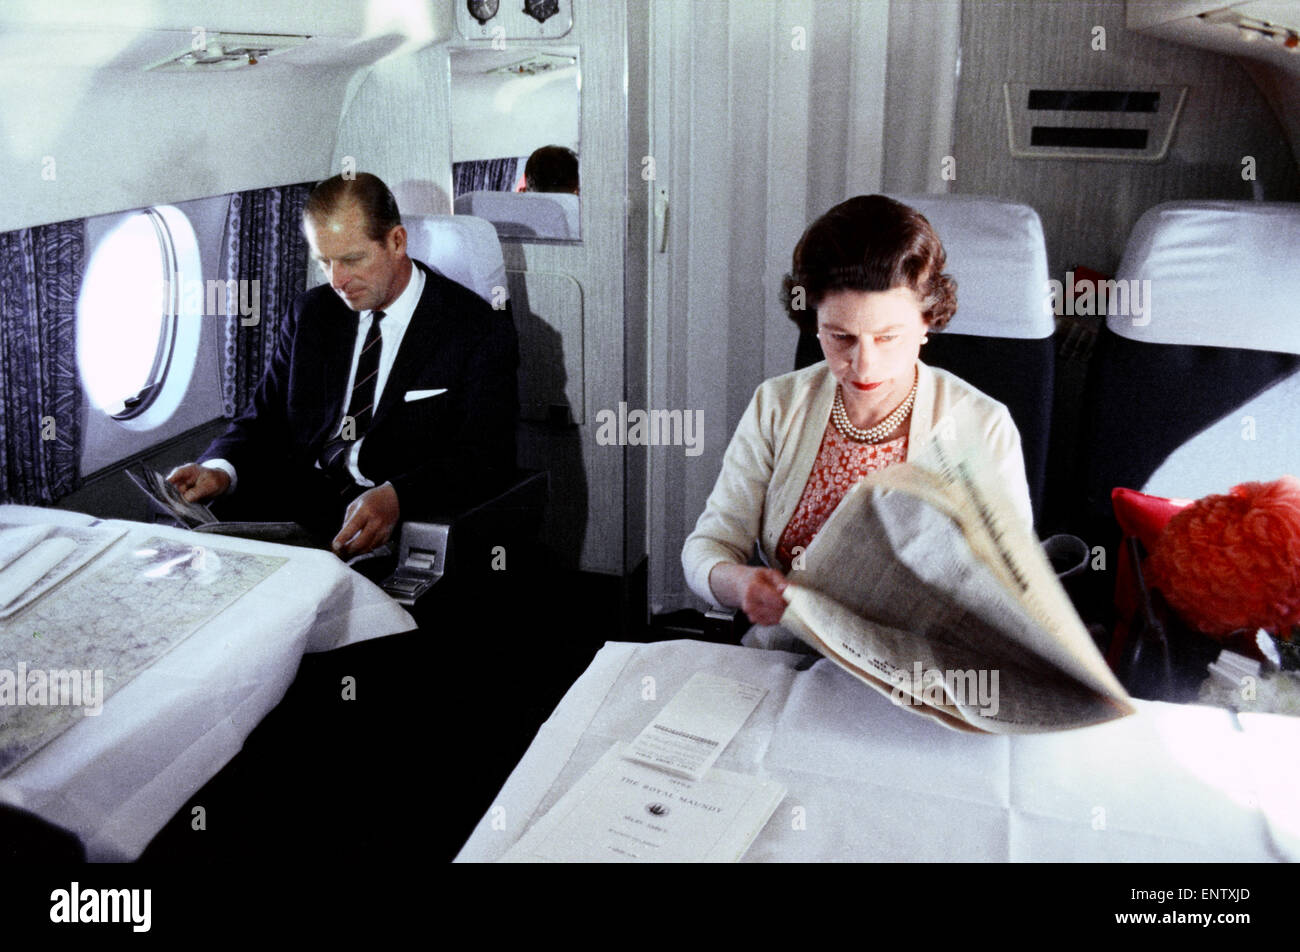 The Queen and Prince Philip on board a private jet. Stock Photo